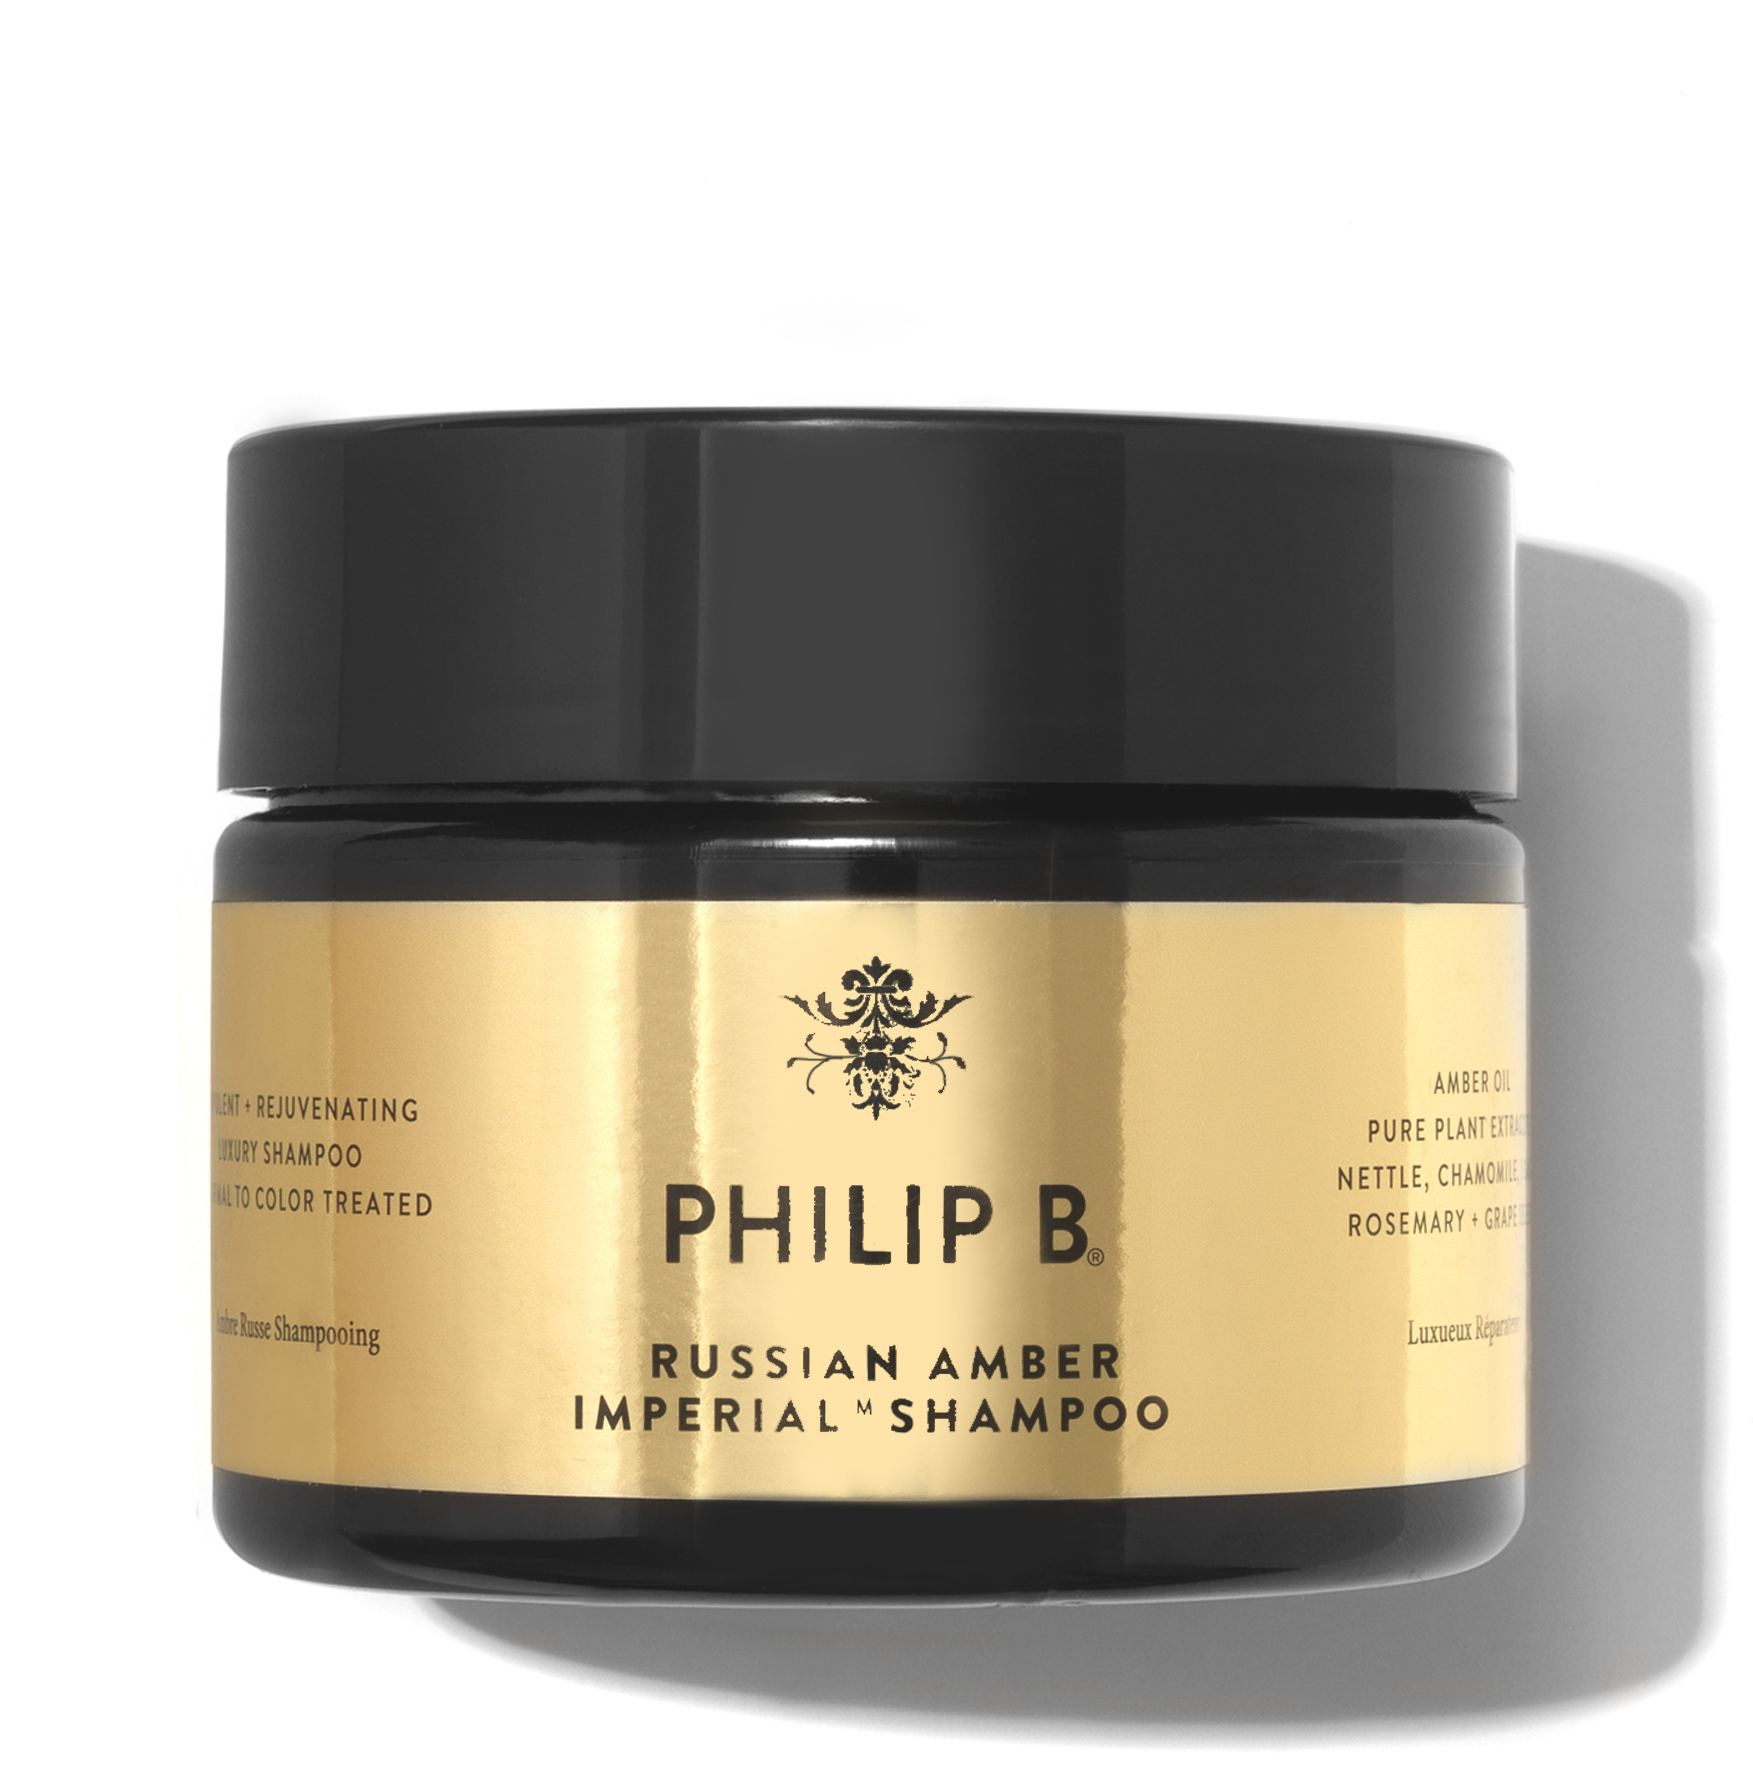 RUSSIAN AMBER IMPERIAL SHAMPOO - PHILIP B | Space NK